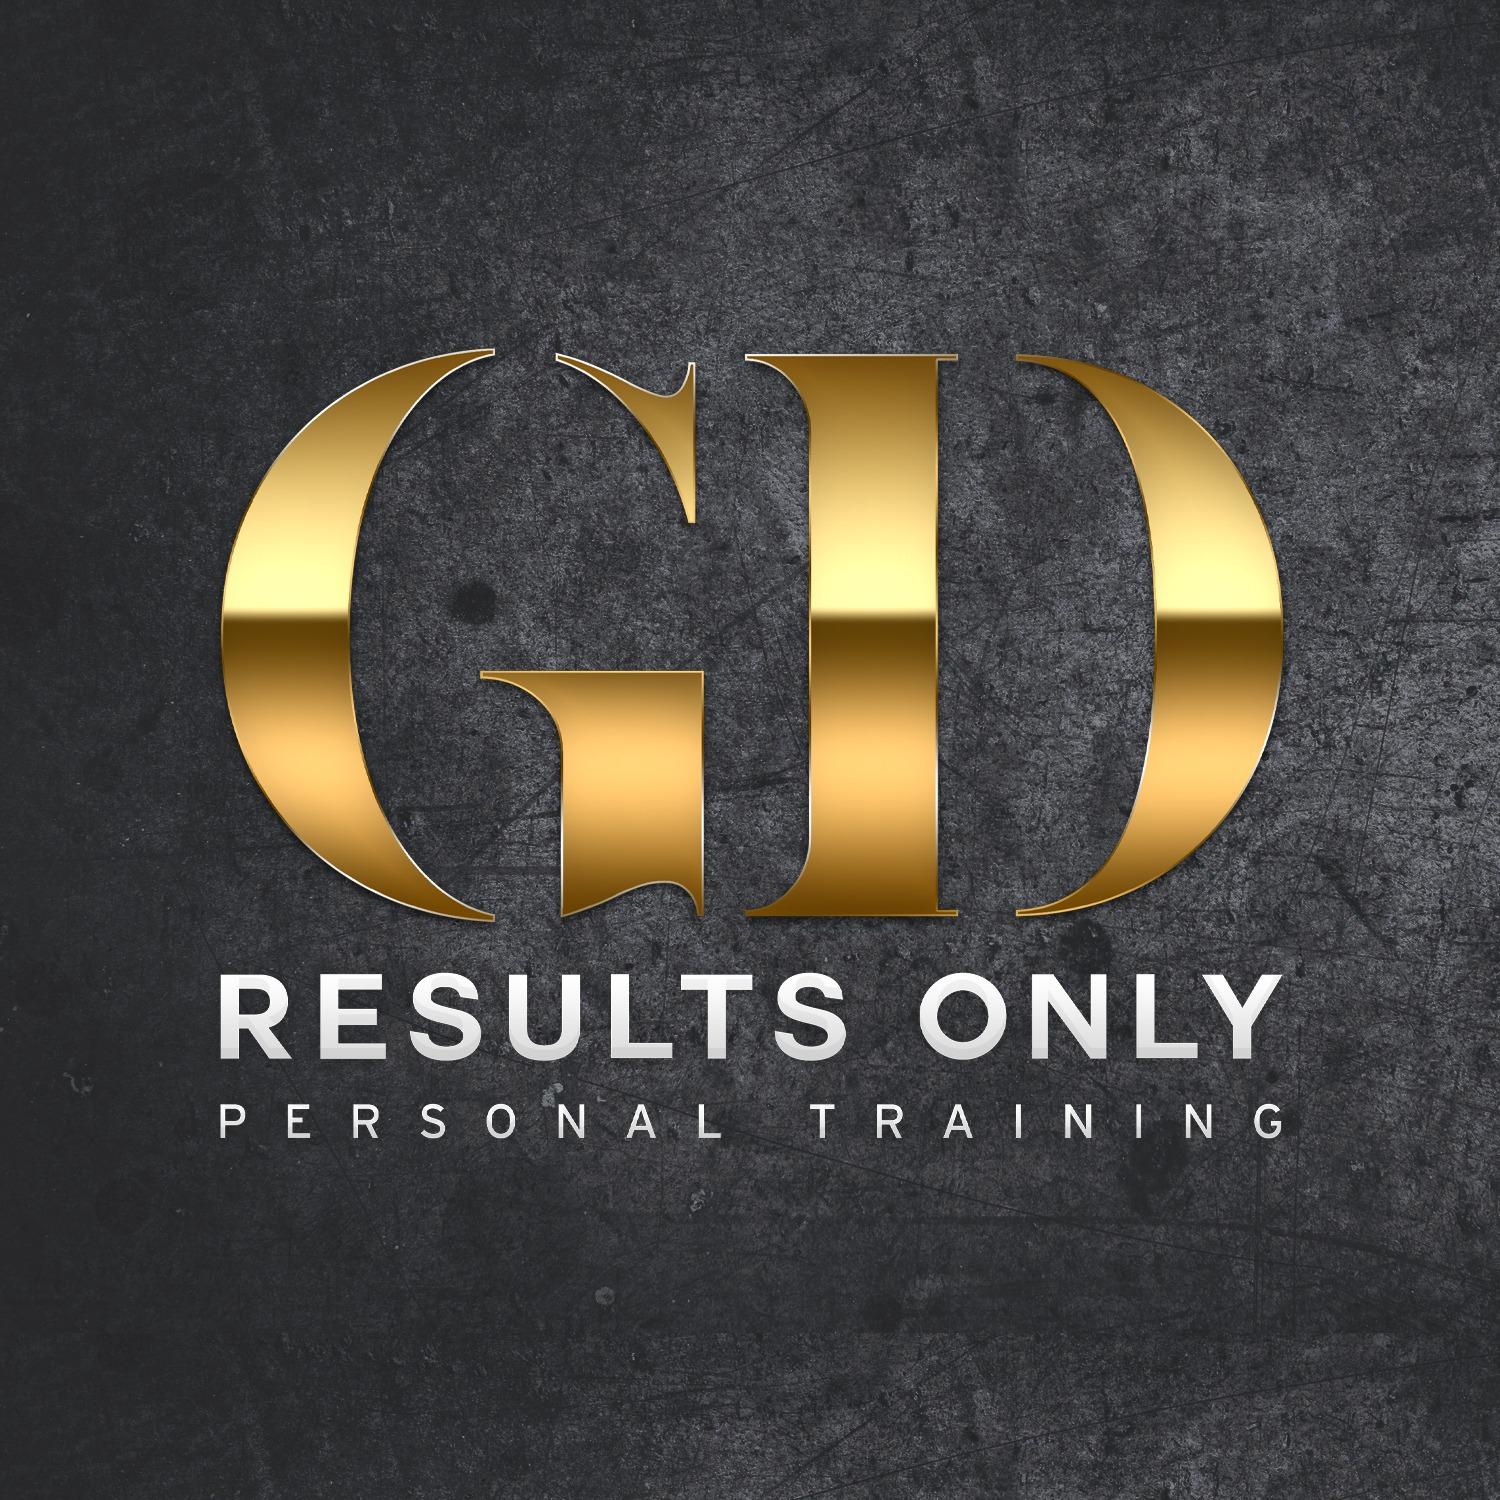 Results Only - Personal Training in Frankfurt am Main - Logo